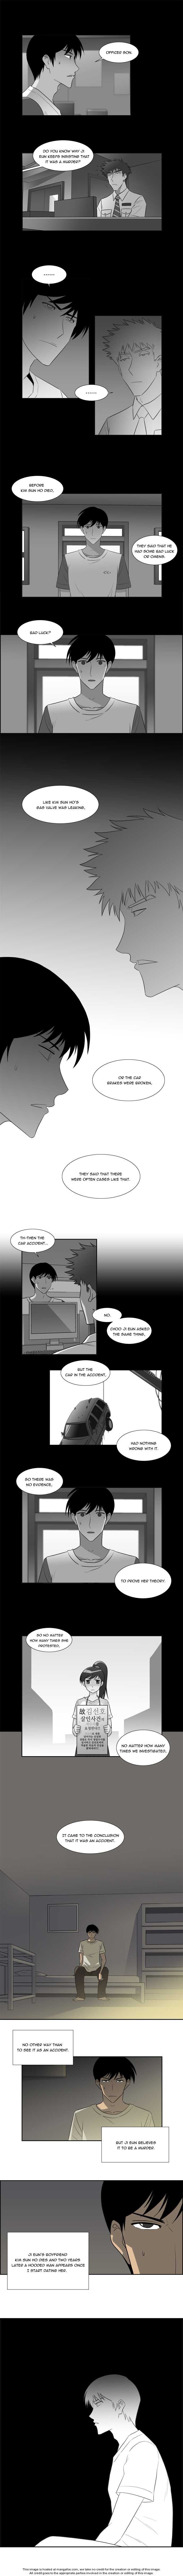 Melo Holic Chapter 031 page 5